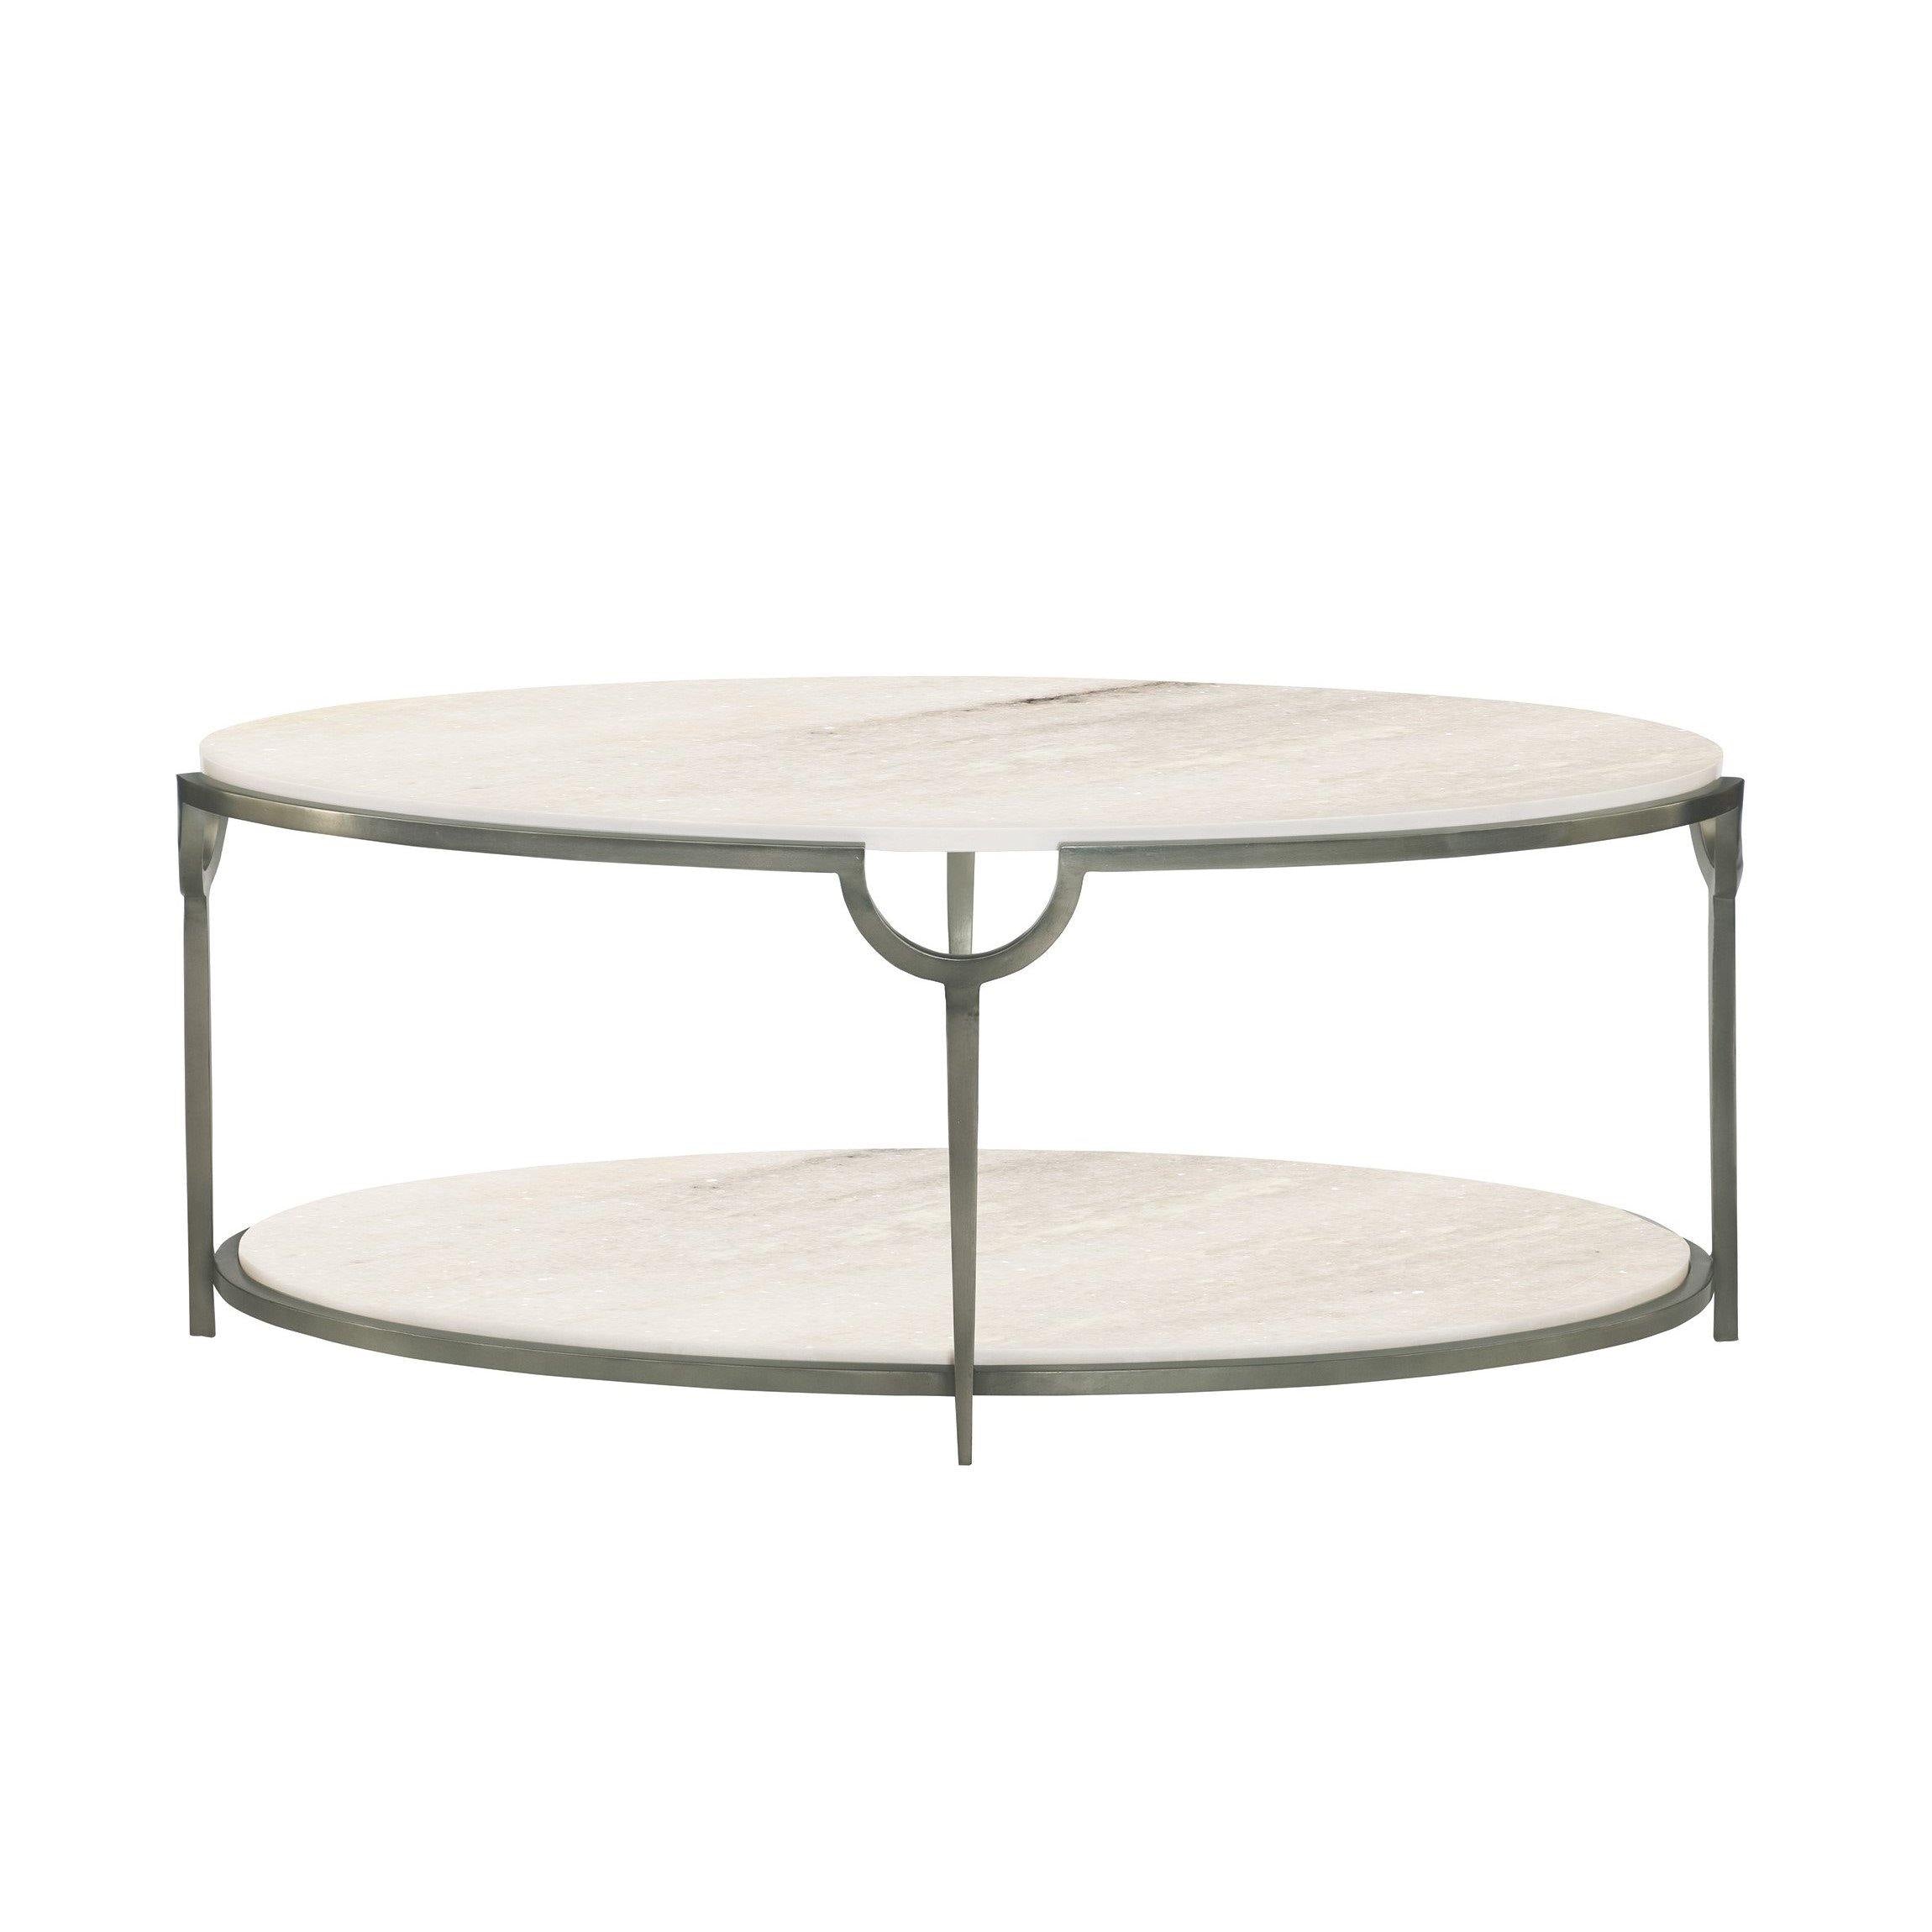 Morello Cocktail Table - The Tin Roof Furniture